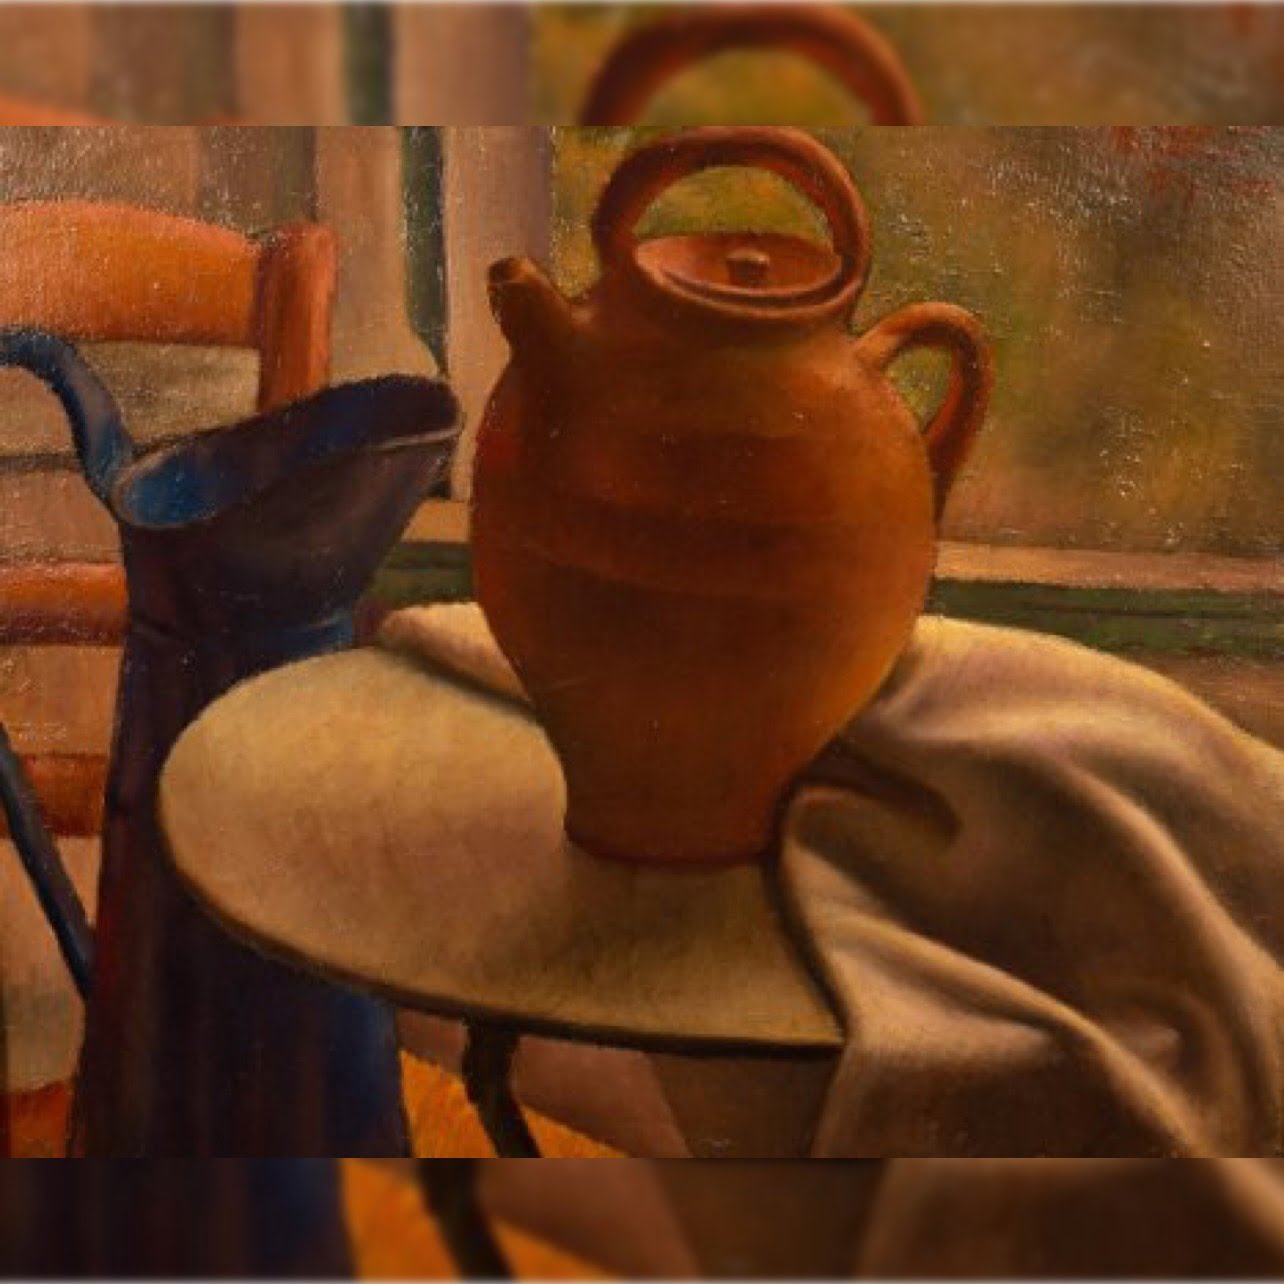 Still Life with Earthenware Vessel and Blue Ewer by Mark Gertler via 360 MAGAZINE